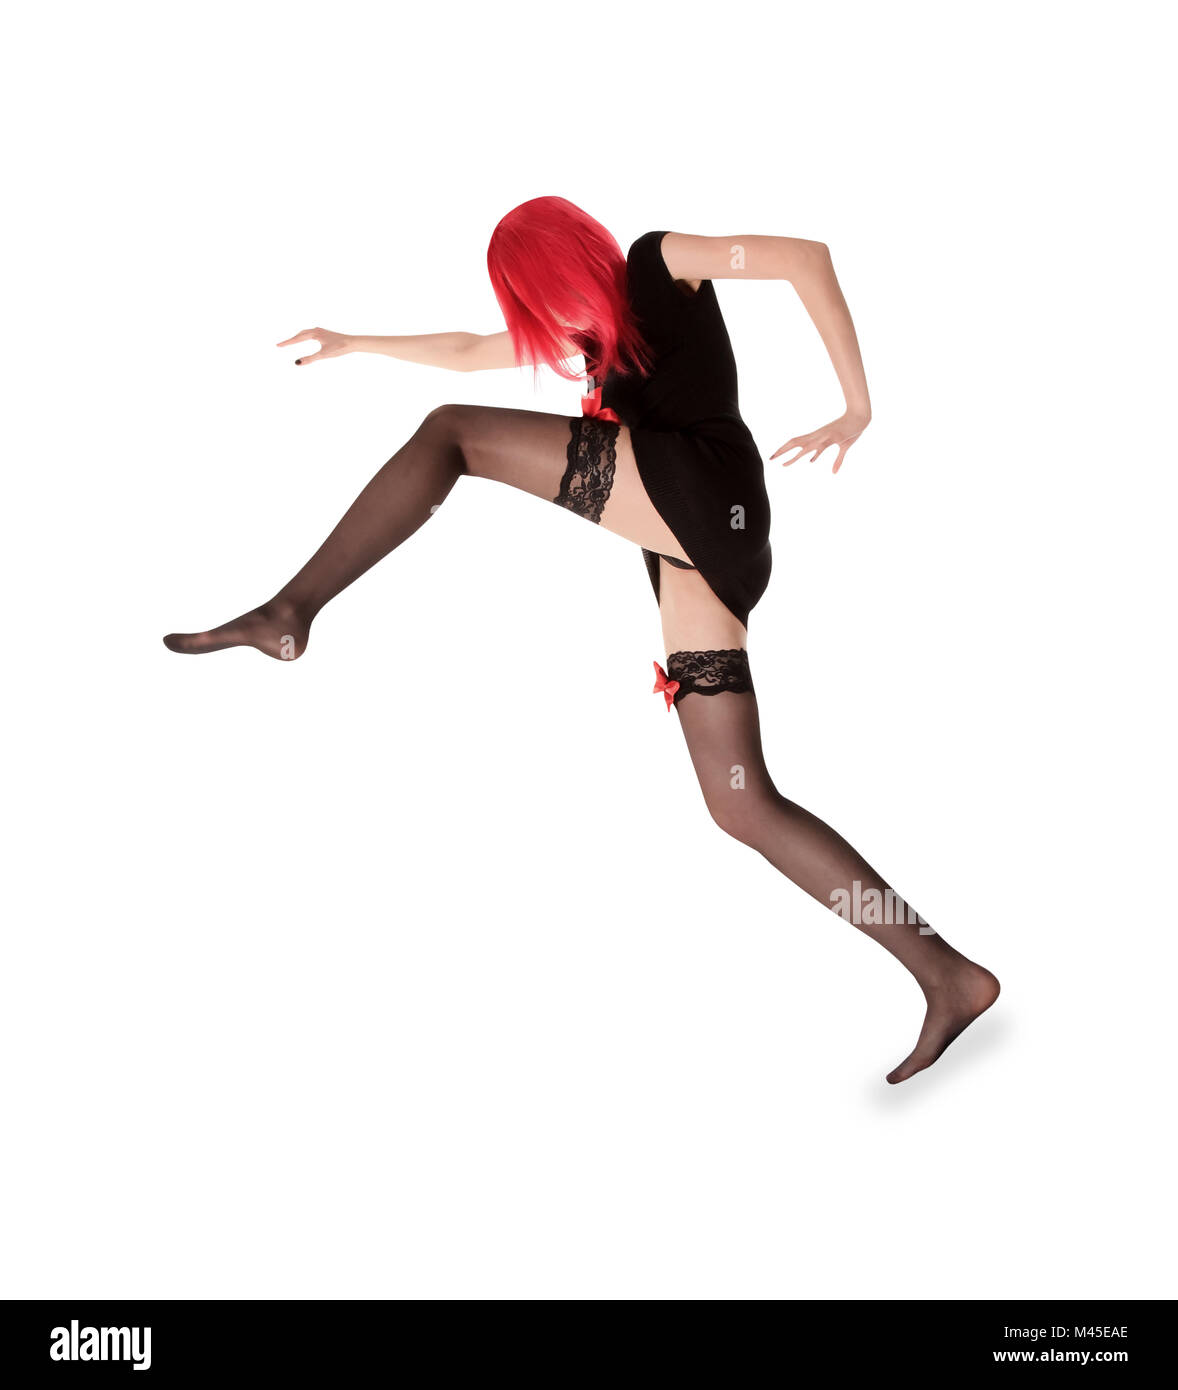 picture of red hair woman in black stockings posing Stock Photo